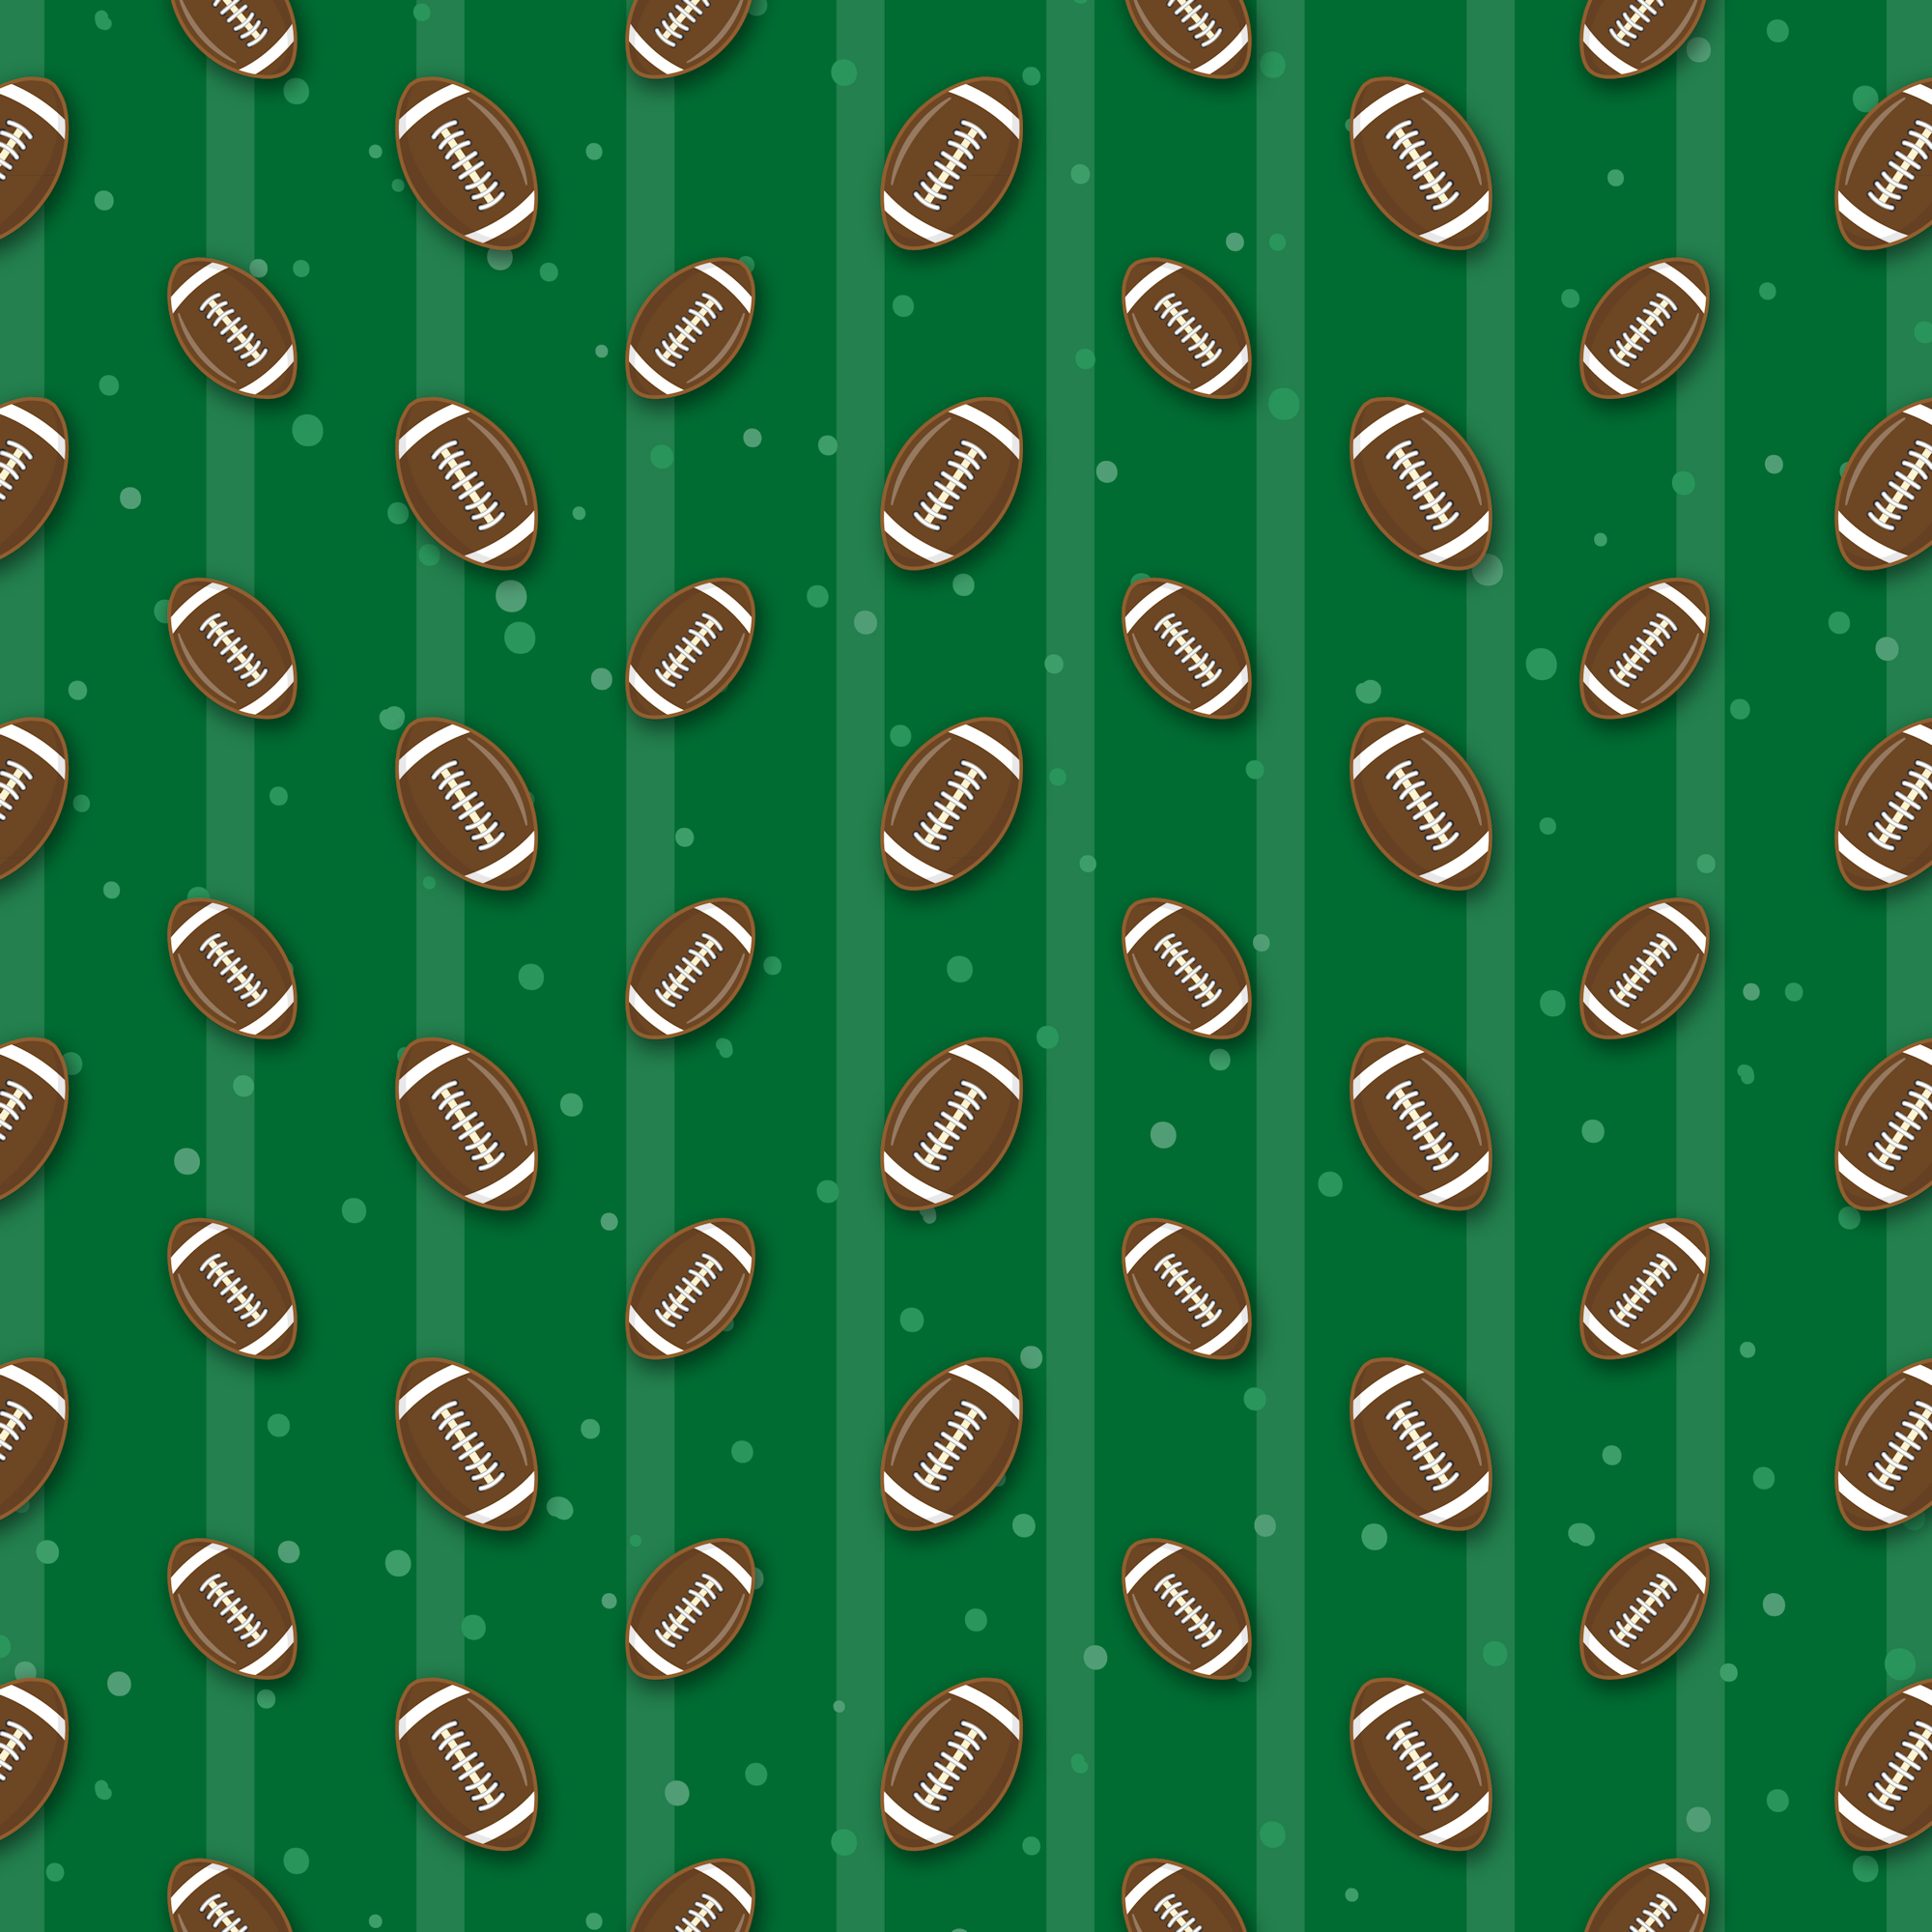 Sports Beat Collection Field Goal 12 x 12 Double-Sided Scrapbook Paper by SSC Designs